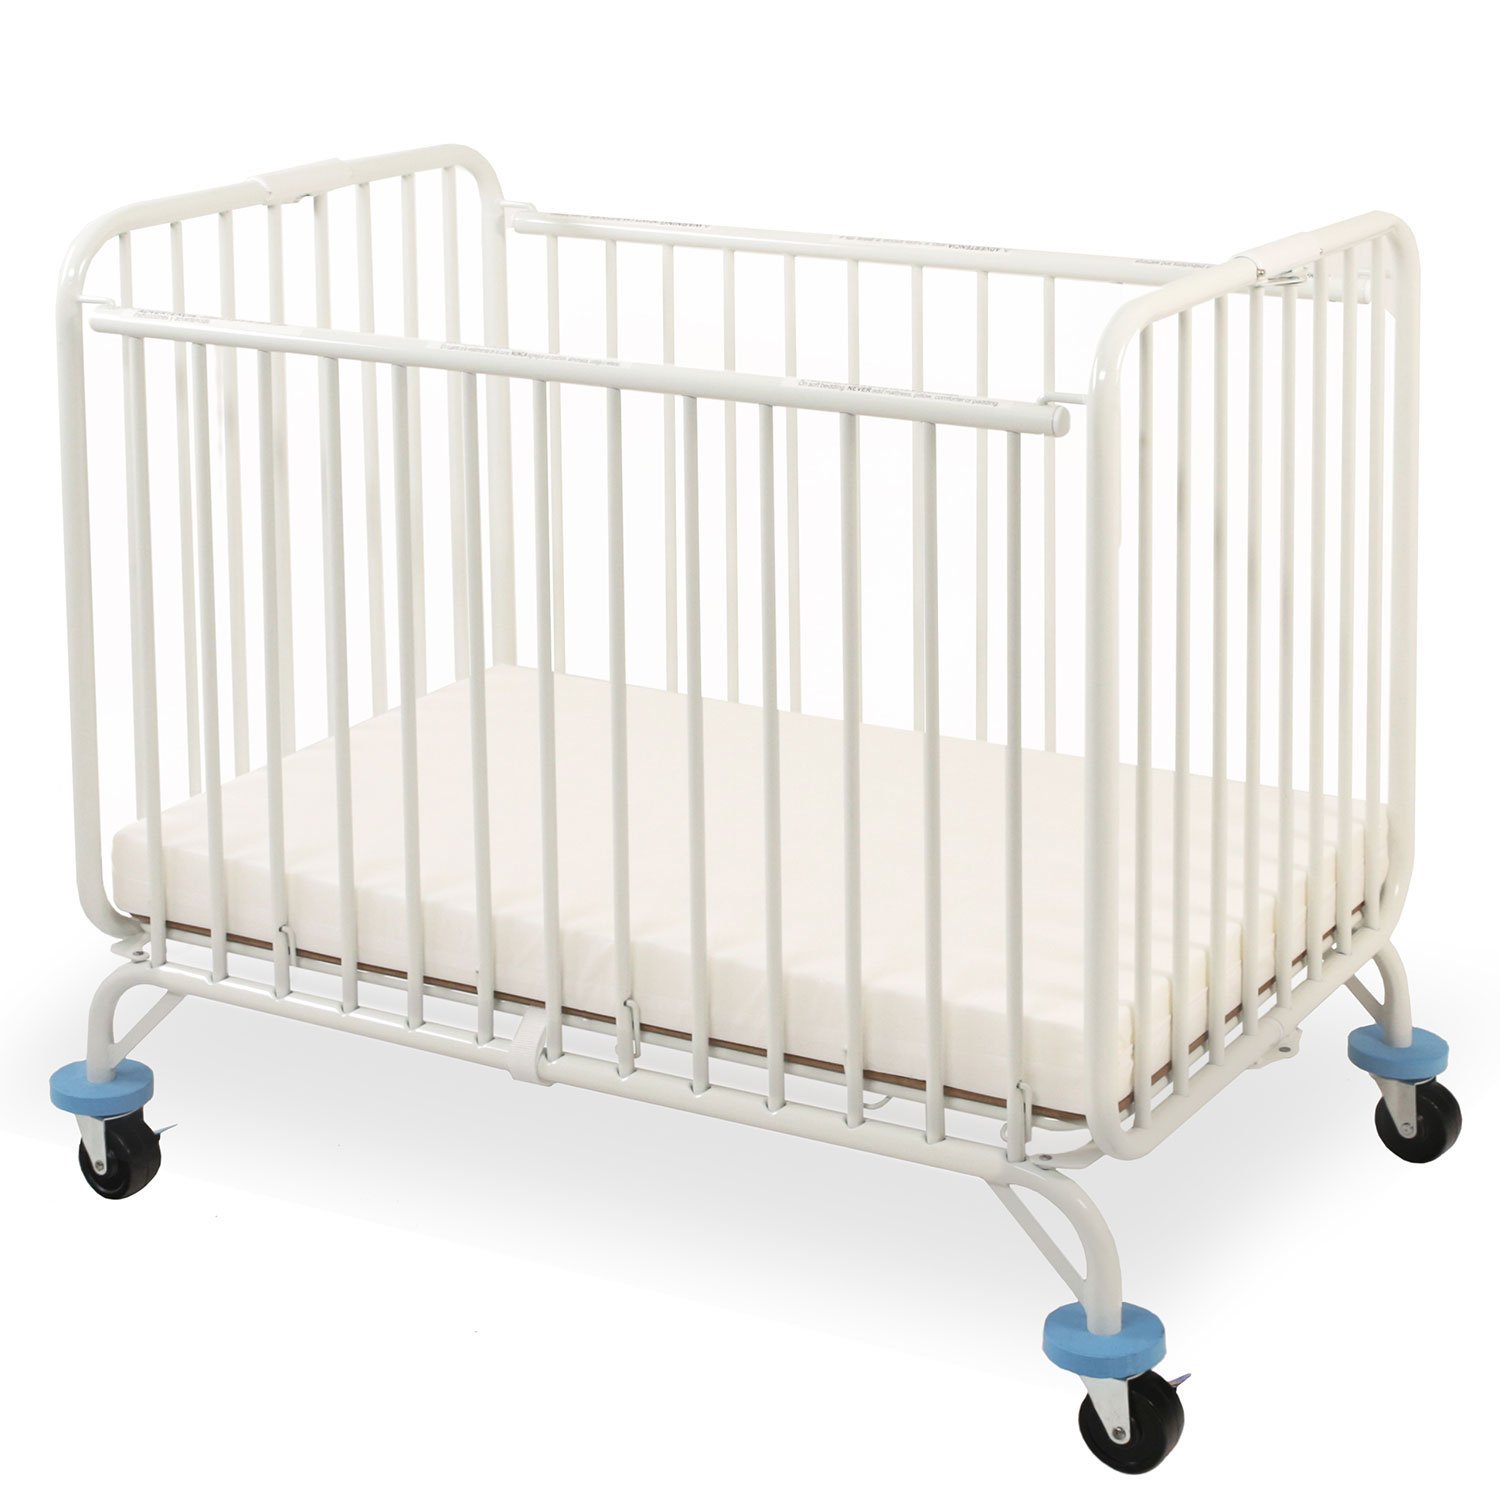 L.A. Baby Deluxe Holiday Mini Crib